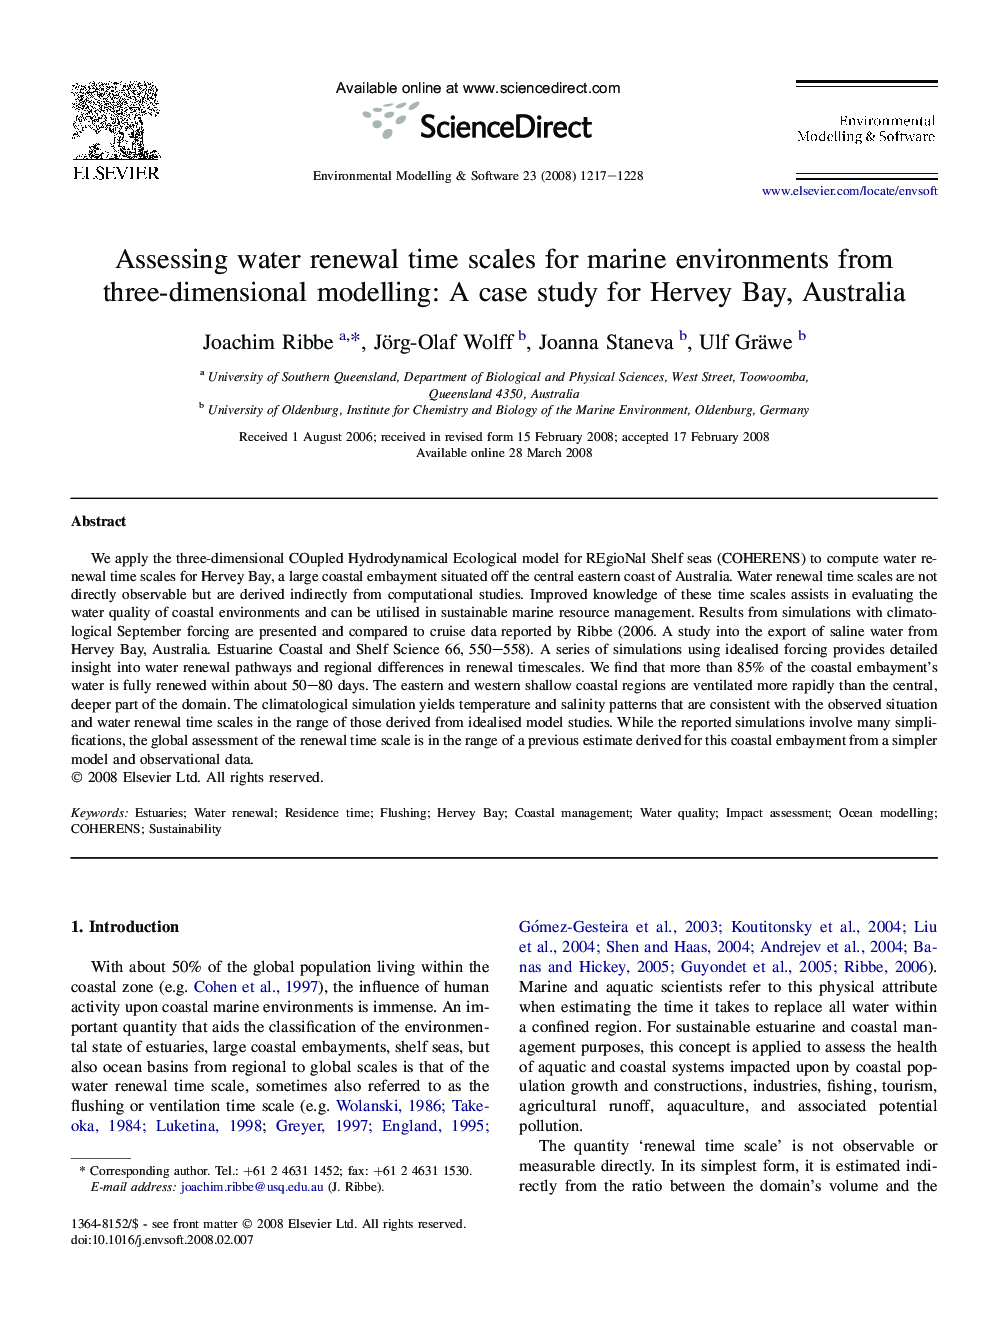 Assessing water renewal time scales for marine environments from three-dimensional modelling: A case study for Hervey Bay, Australia